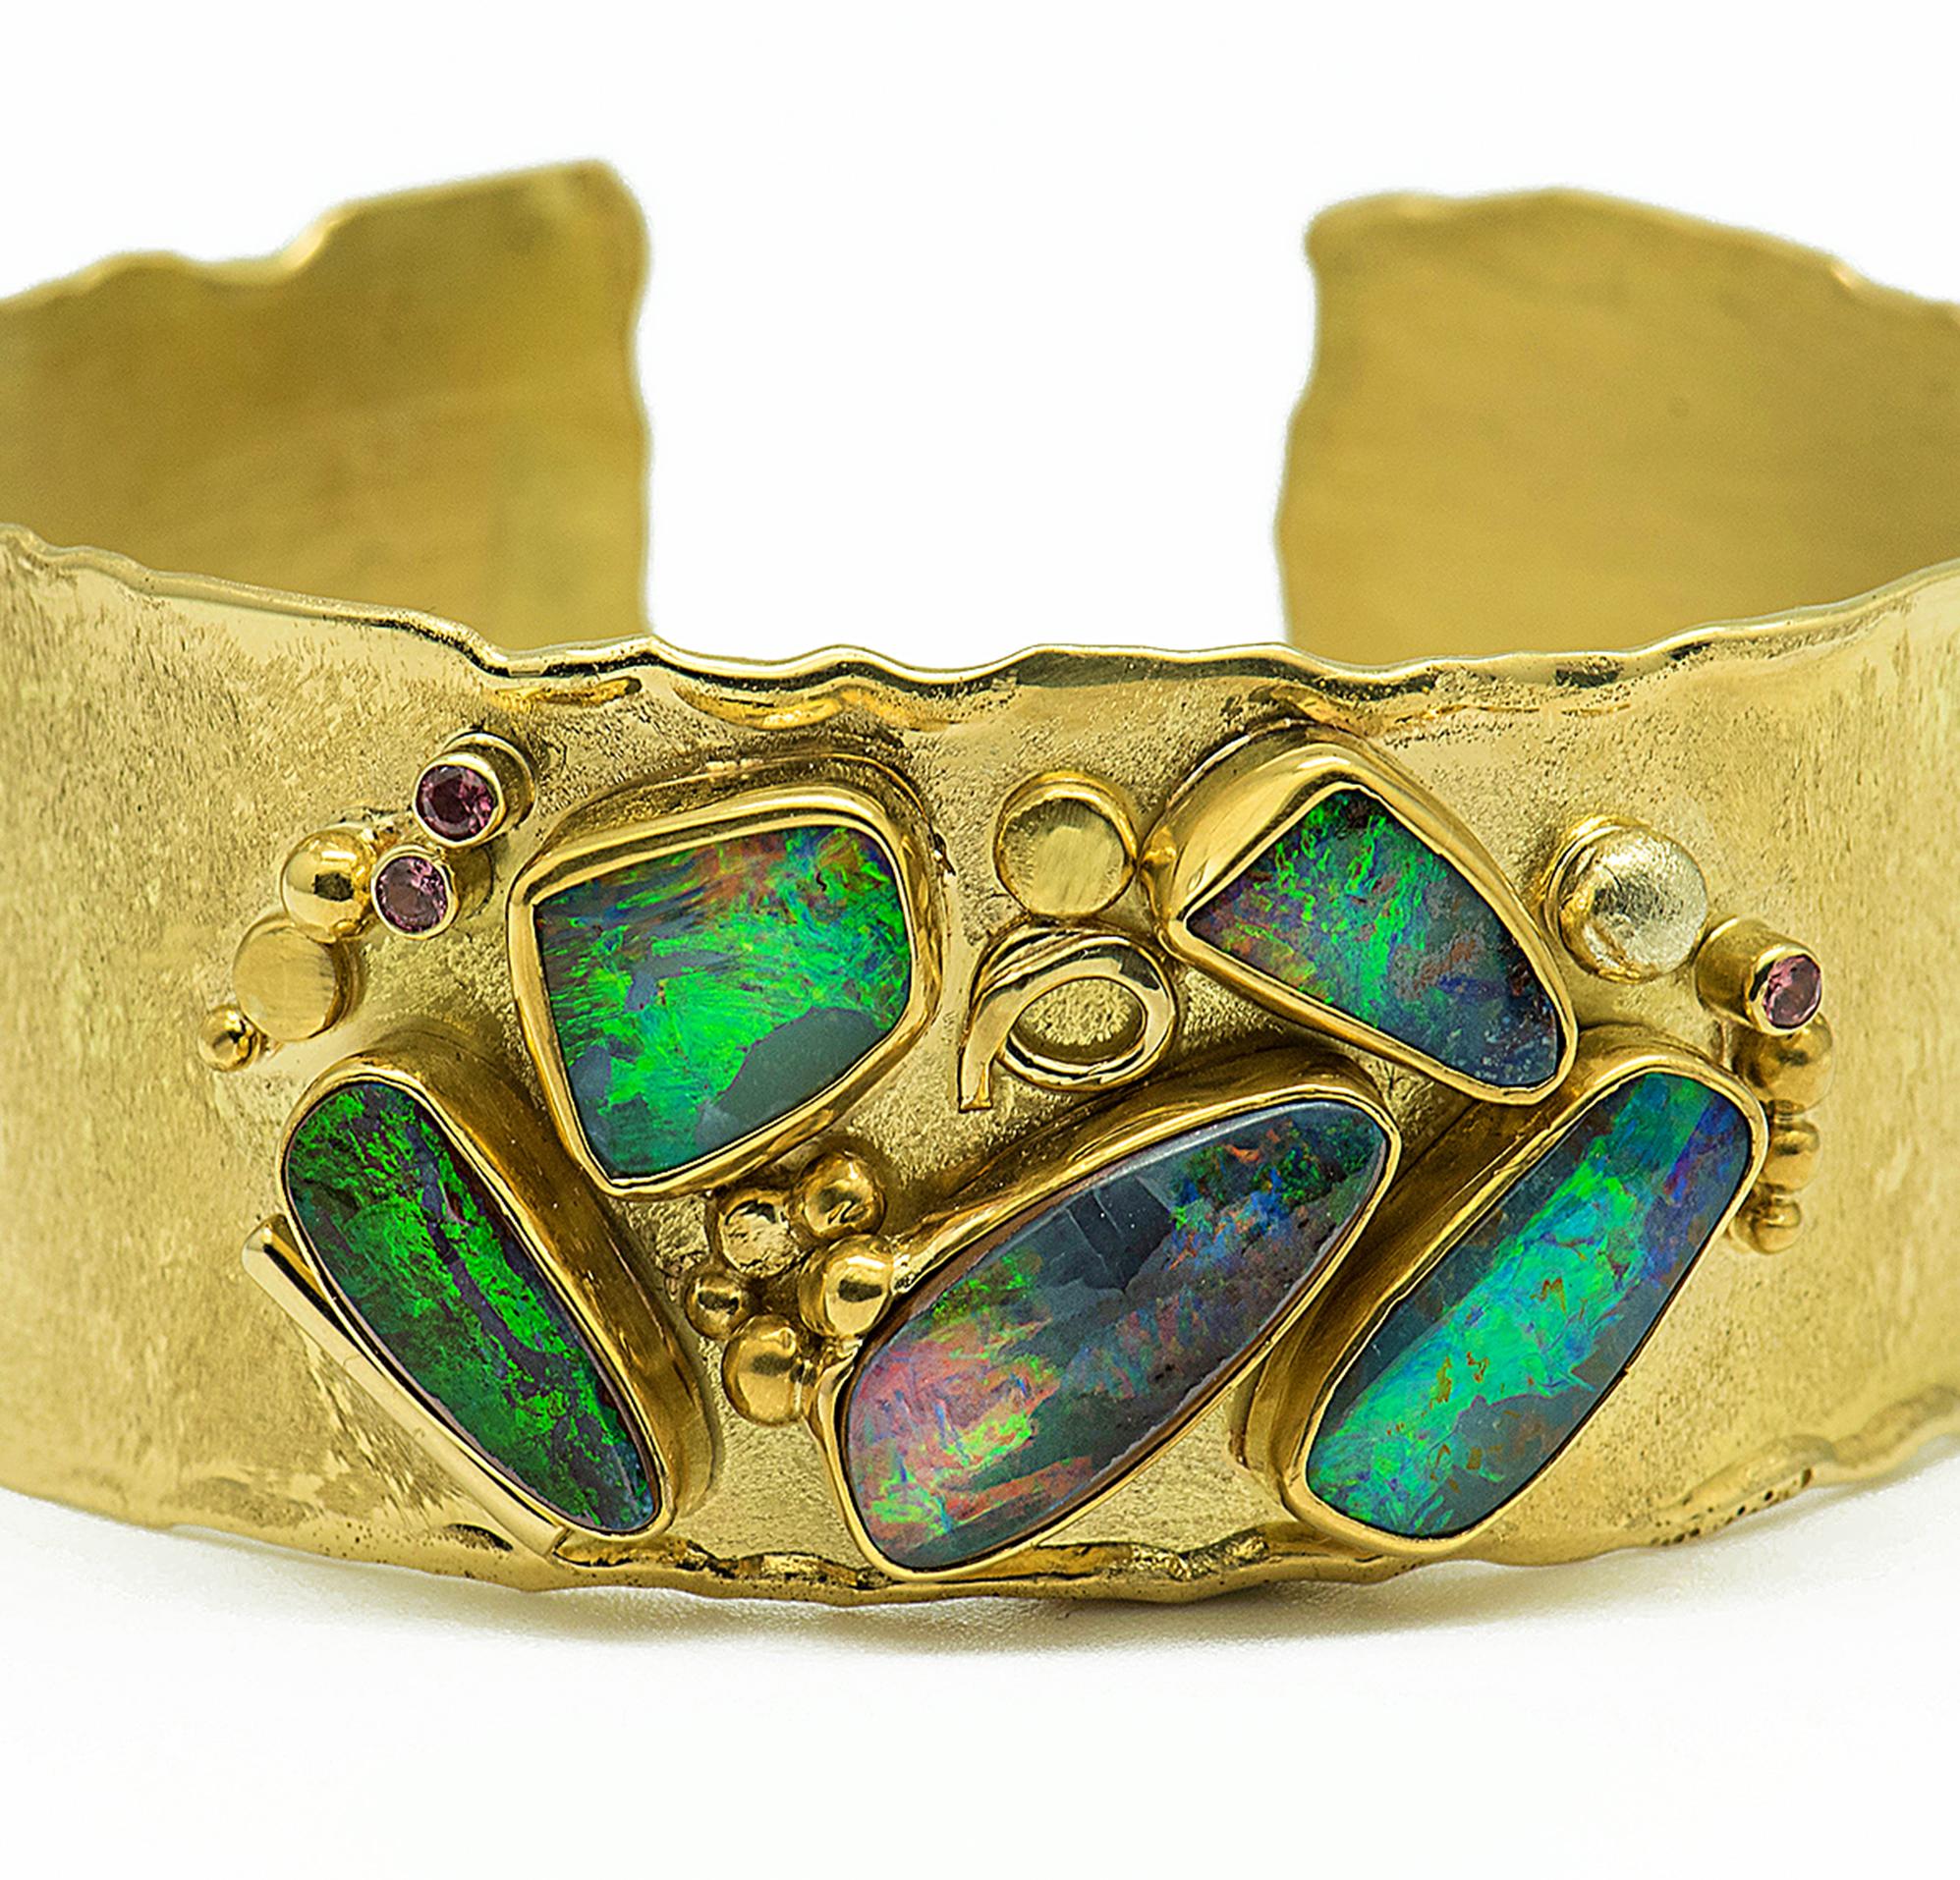 Boulder opal cuff bracelet with 5 boulder opals in the green, blues and some flashes of red.  18k gold arabesque design elements sprinkle the surface of a 18k gold cuff;  accented with sapphire and garnet.  The cuff is 1.0